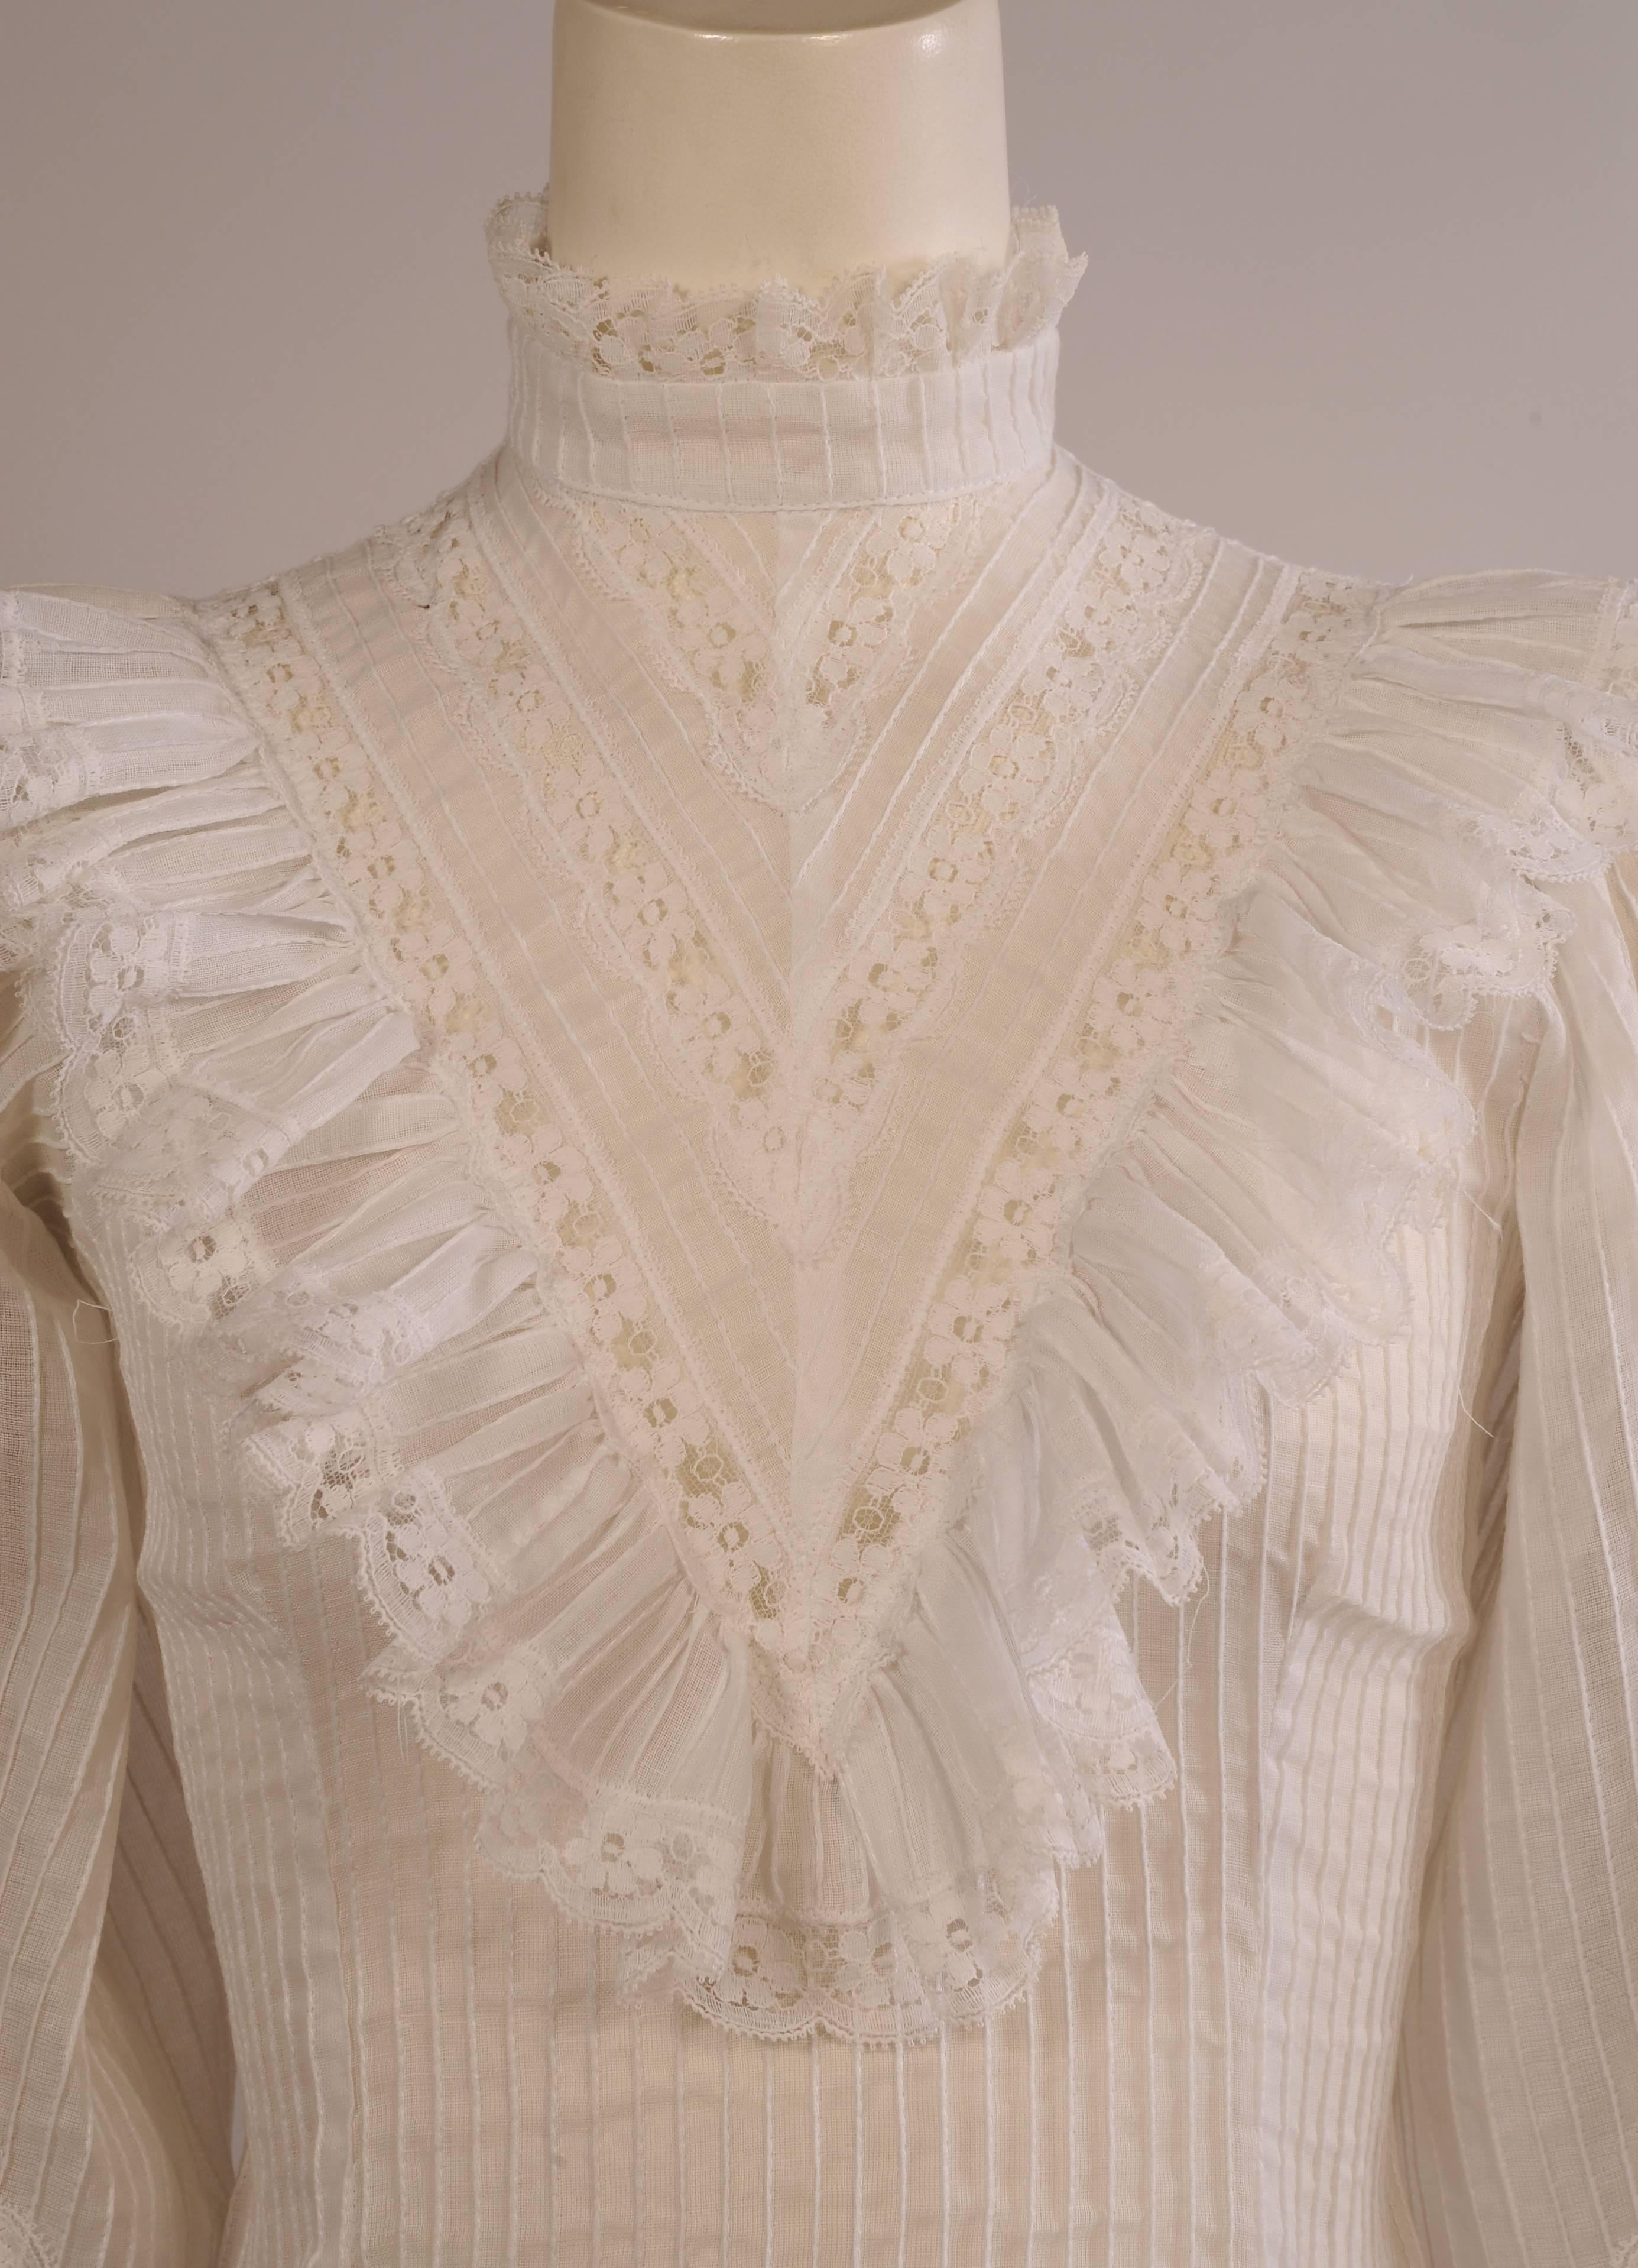 Inspired by the resurgence of Victorian clothing in the 1970's vintage clothing market this blouse is a very well done recreation. The lace trimmed high collar and ruffled yoke front are complimented by lace insertion in the full sleeves.
The fitted